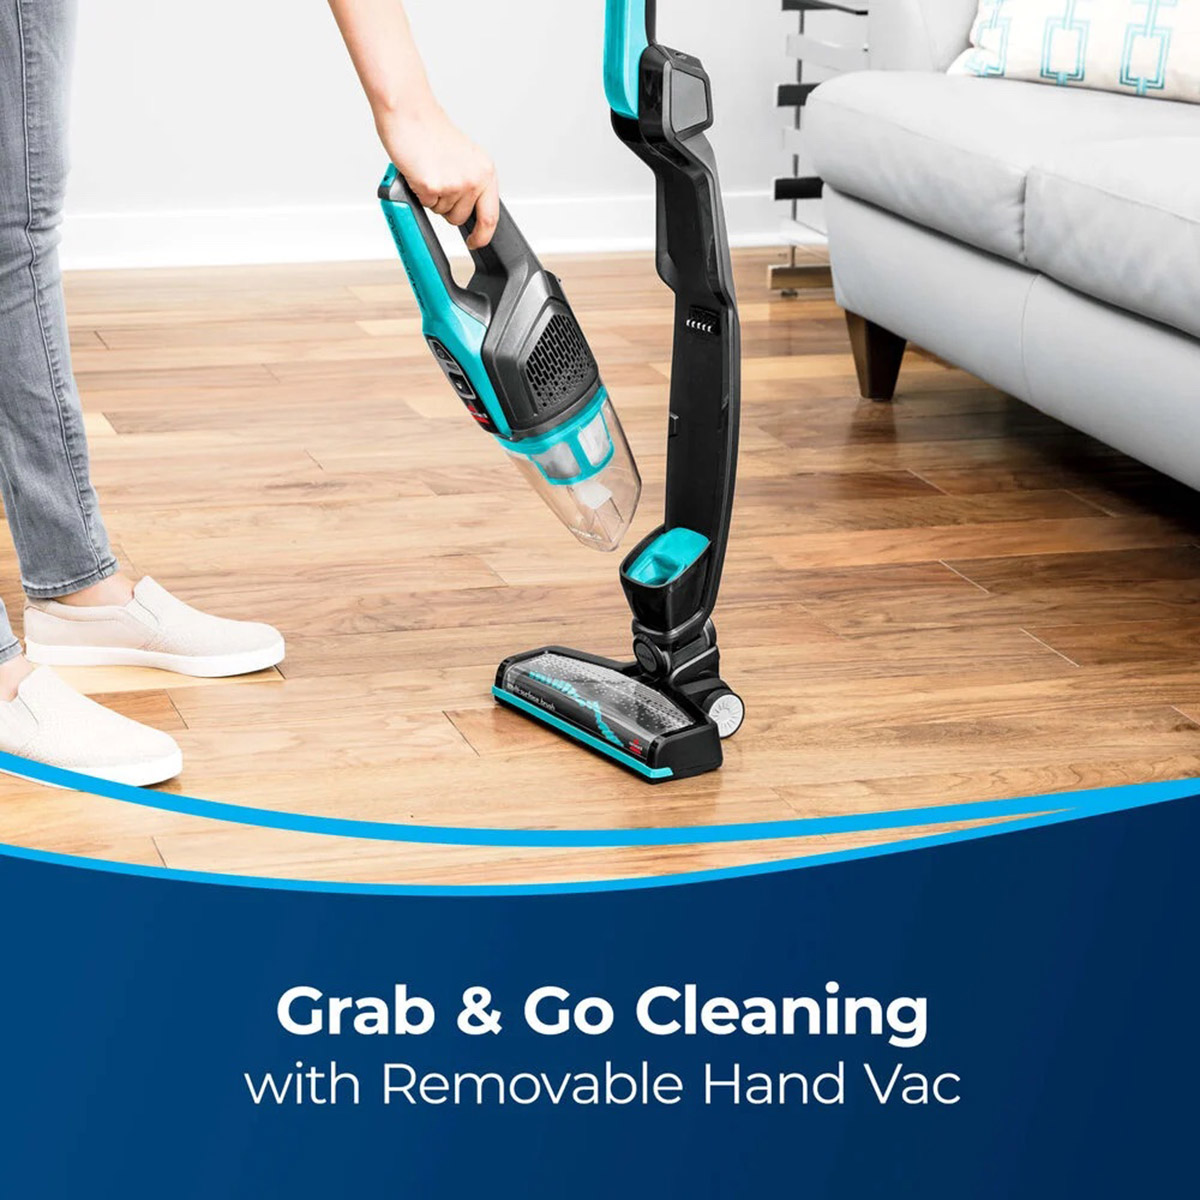 Bissell(R) ReadyClean Ion Cordless Stick Vacuum